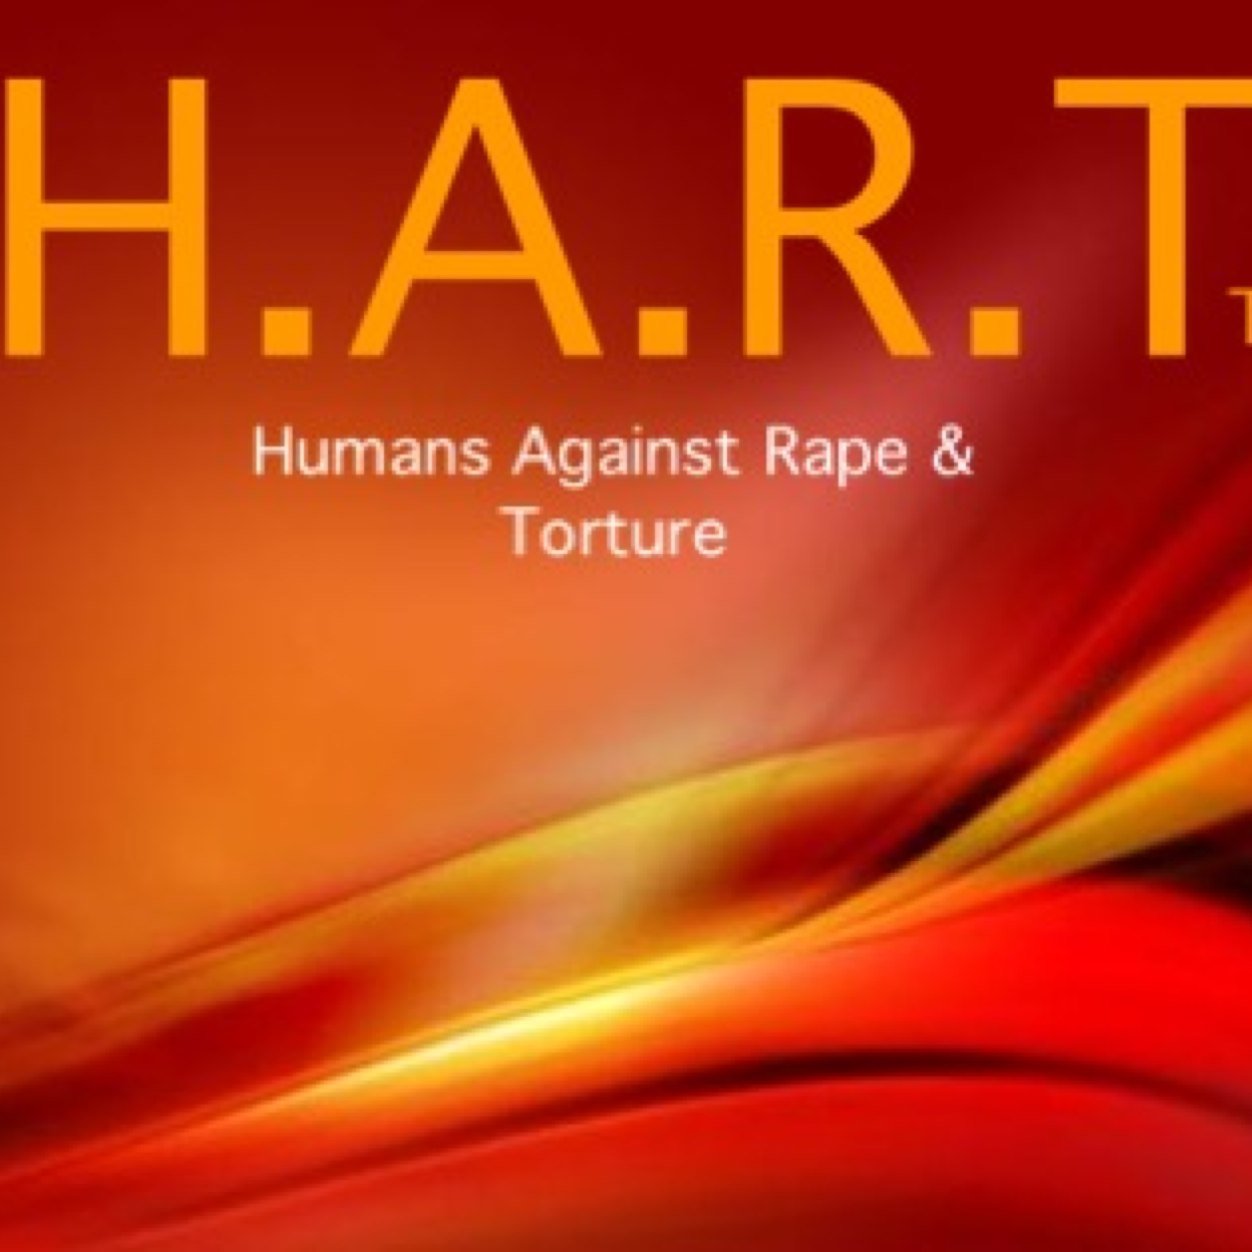 The HART society is; Humans Against Rape and Torture. Having a crisis? Please dont hesitate to contact HART's founder @KellinaShayAnne we can&WILL END violence